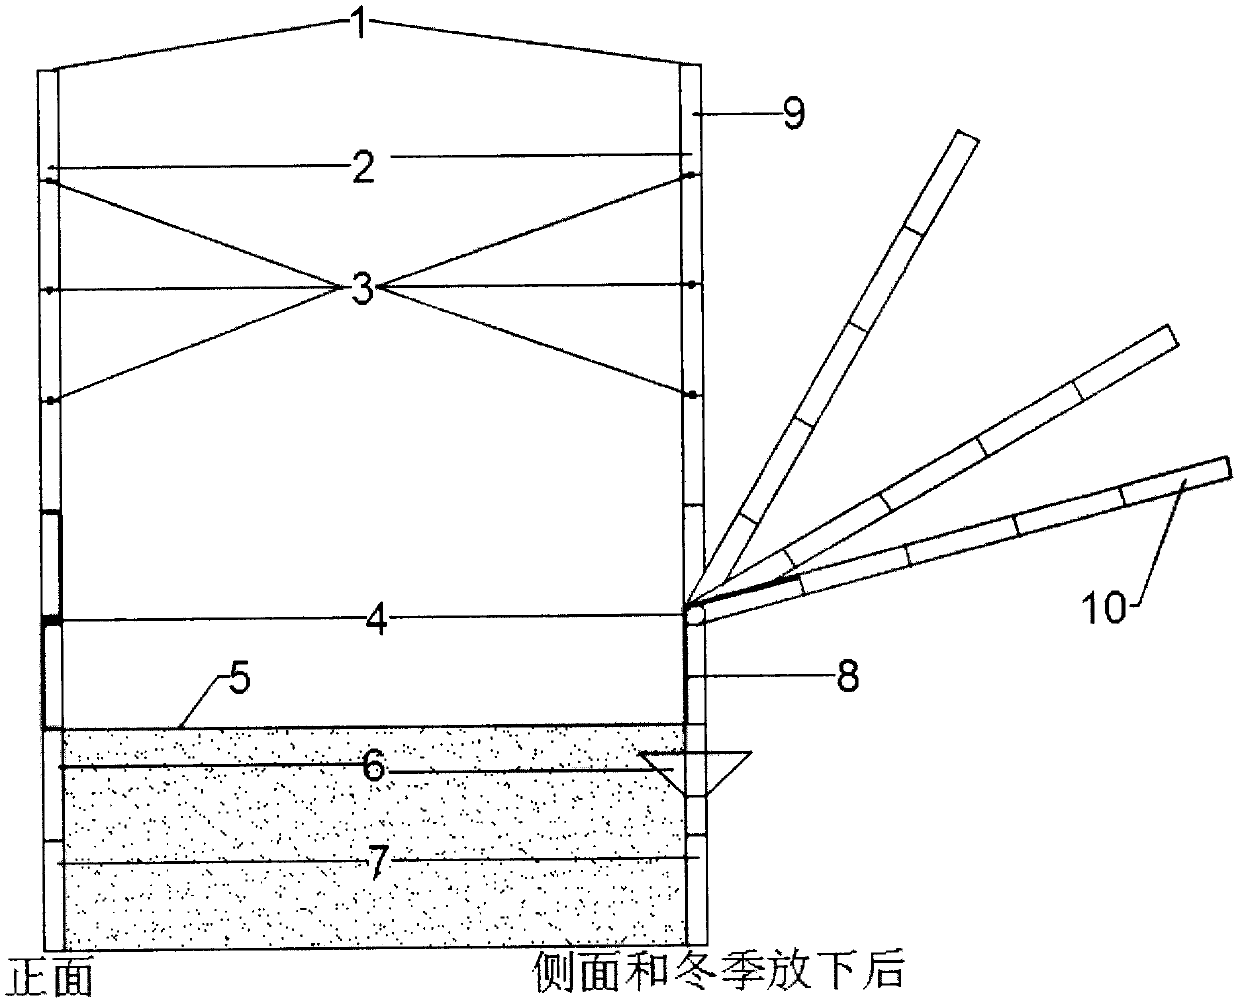 Mechanized on-trellis ecological method for cultivating grapes without soil burying